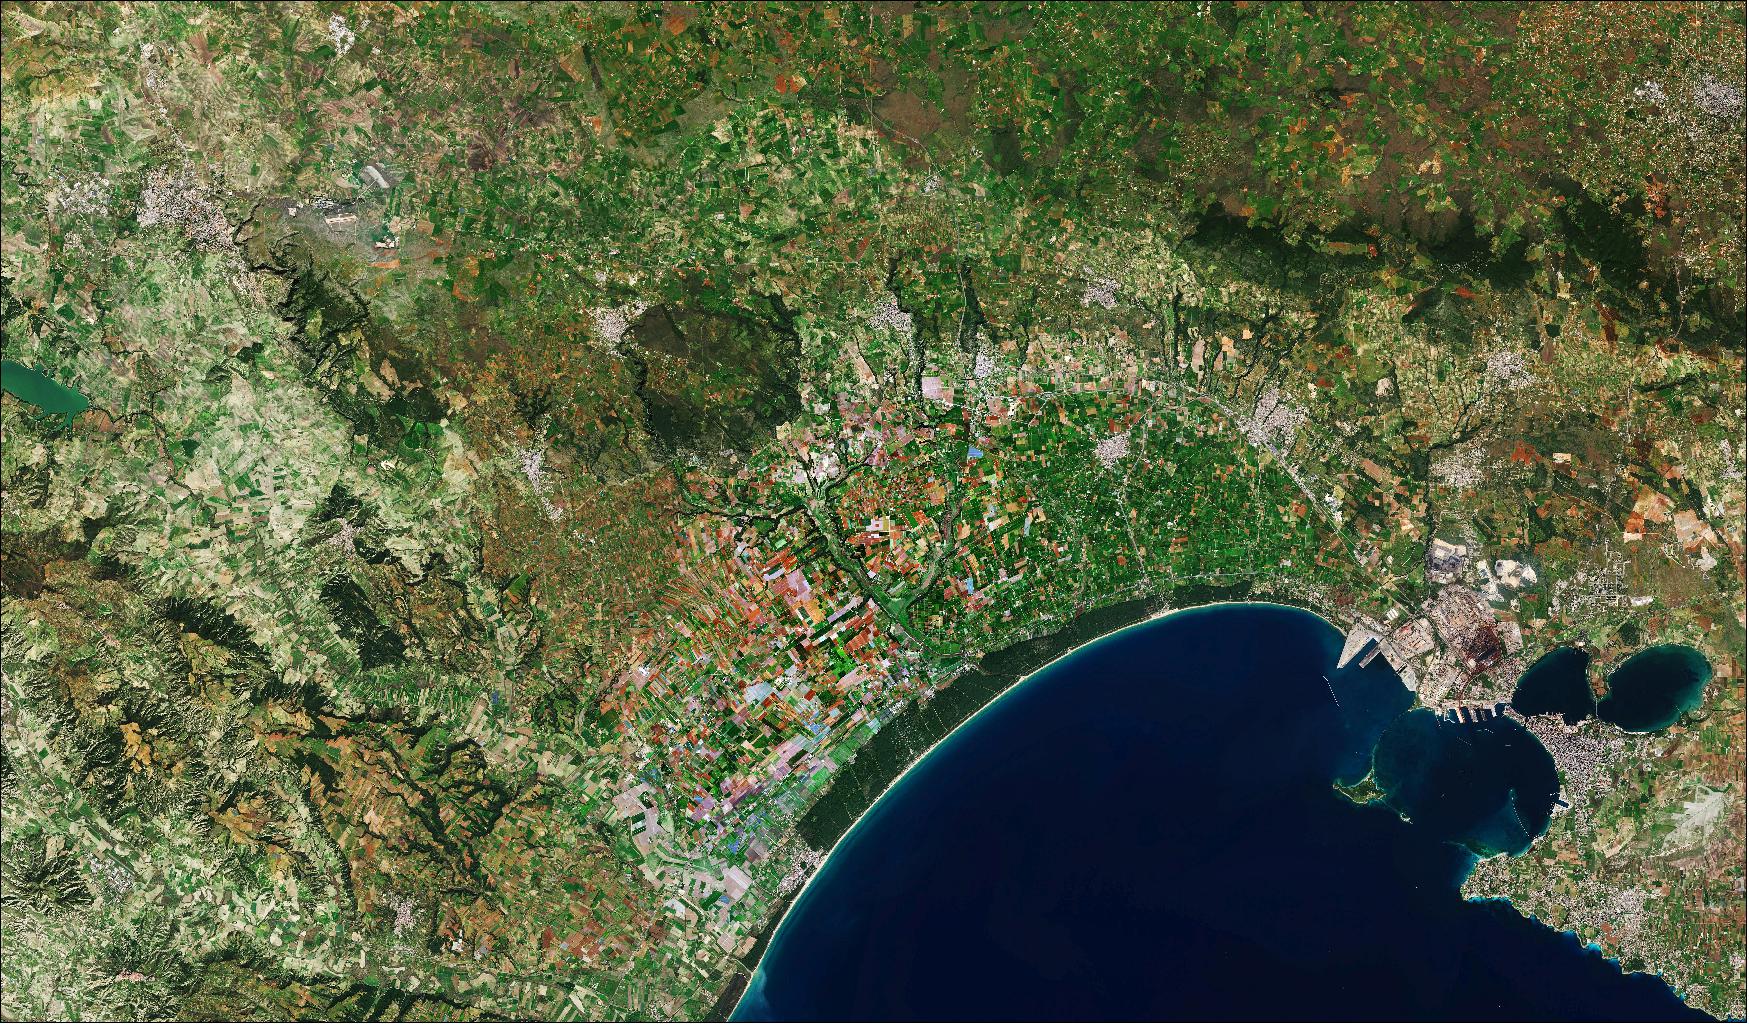 Figure 24: Taranto, an important coastal city, is visible on the bottom right of the image. Founded by a Greek colony in the 8th century, the city is now an important commercial port. The islets of San Pietro and San Paolo, known as the Cheradi Islands, protect the Mar Grande, the main commercial port of the city. It is separated from the Mar Piccolo, an inland lagoon, by a cape which closes the gulf. The industrial district, which is visible northwest of the city, has a high number of factories, oil refineries, steelworks and iron foundries. This image, captured on 6 March 2019, is also featured on the Earth from Space video program (image credit: ESA, the image contains modified Copernicus Sentinel data (2019), processed by ESA, CC BY-SA 3.0 IGO)